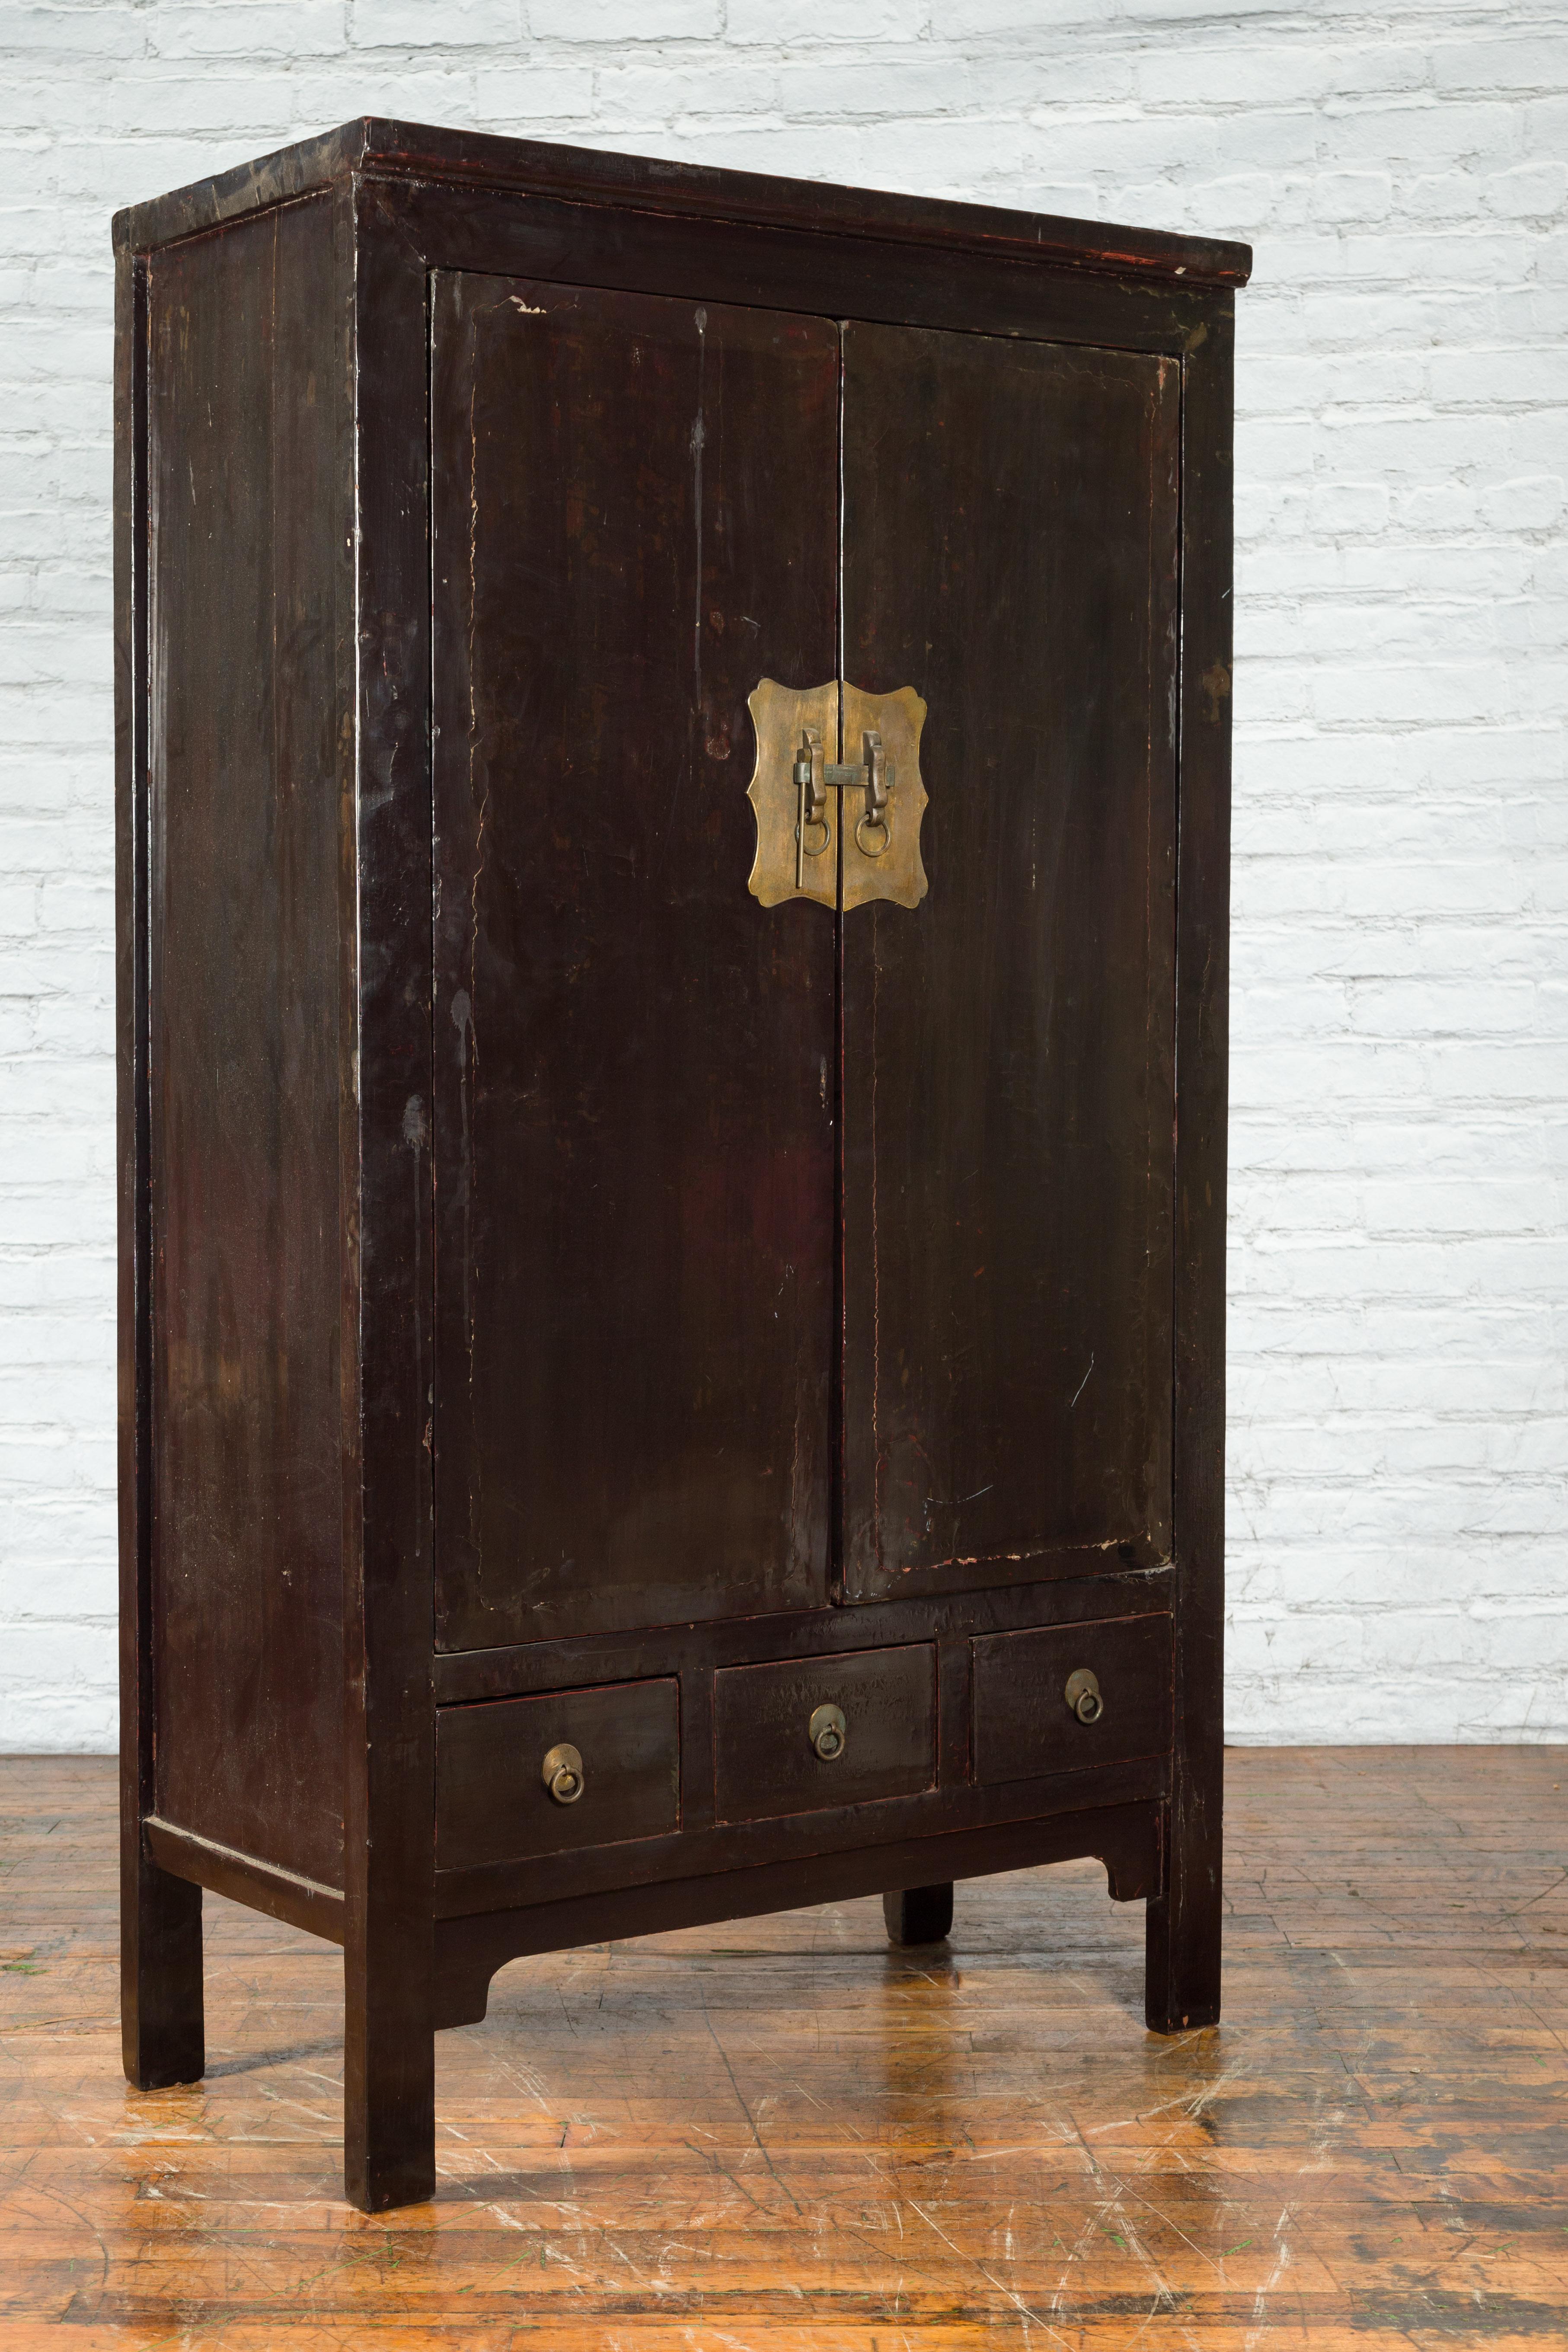 A Chinese Qing Dynasty period wardrobe from the early 19th century with dark brown lacquer, brass hardware, doors, drawers and shelves. Created in China during the Qing Dynasty period in the early years of the 19th century, this wooden wardrobe